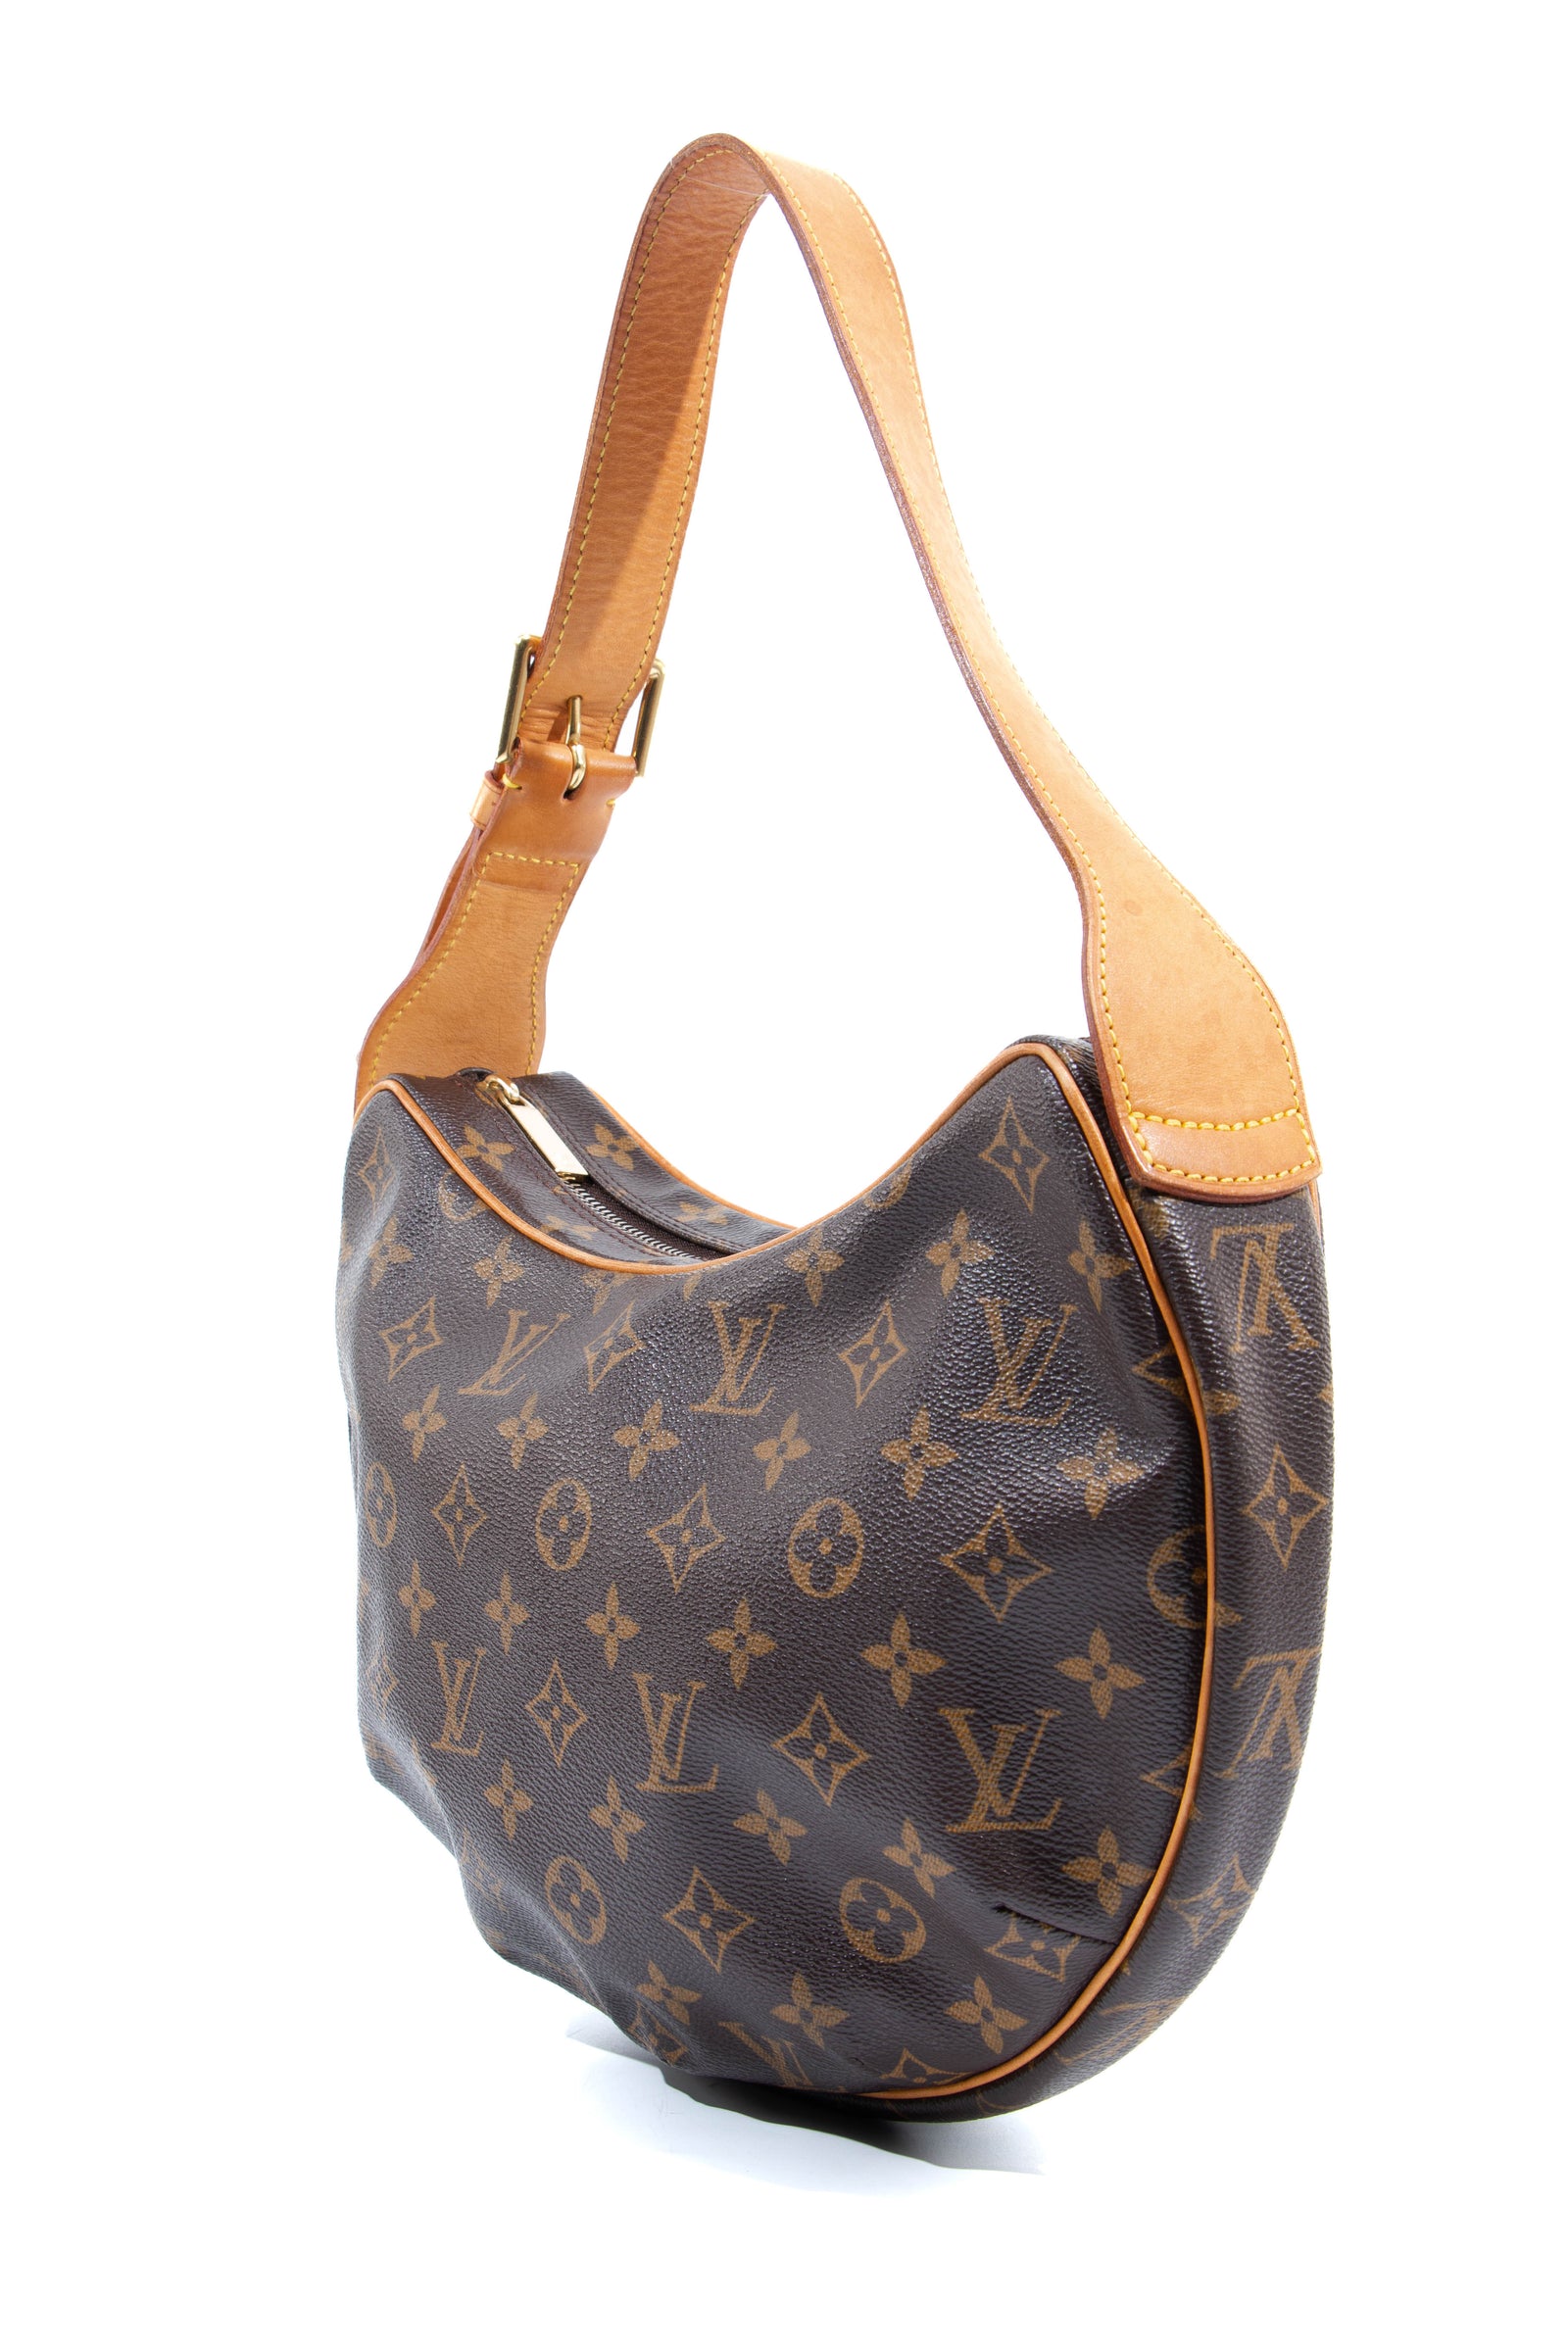 LOUIS VUITTON, YELLOW MONOGRAM KEEPALL BANDOULÍÈRE 50 IN EMBROIDERED MESH  AND LEATHER WITH SILVER TONE HARDWARE, Handbags & Accessories, 2020